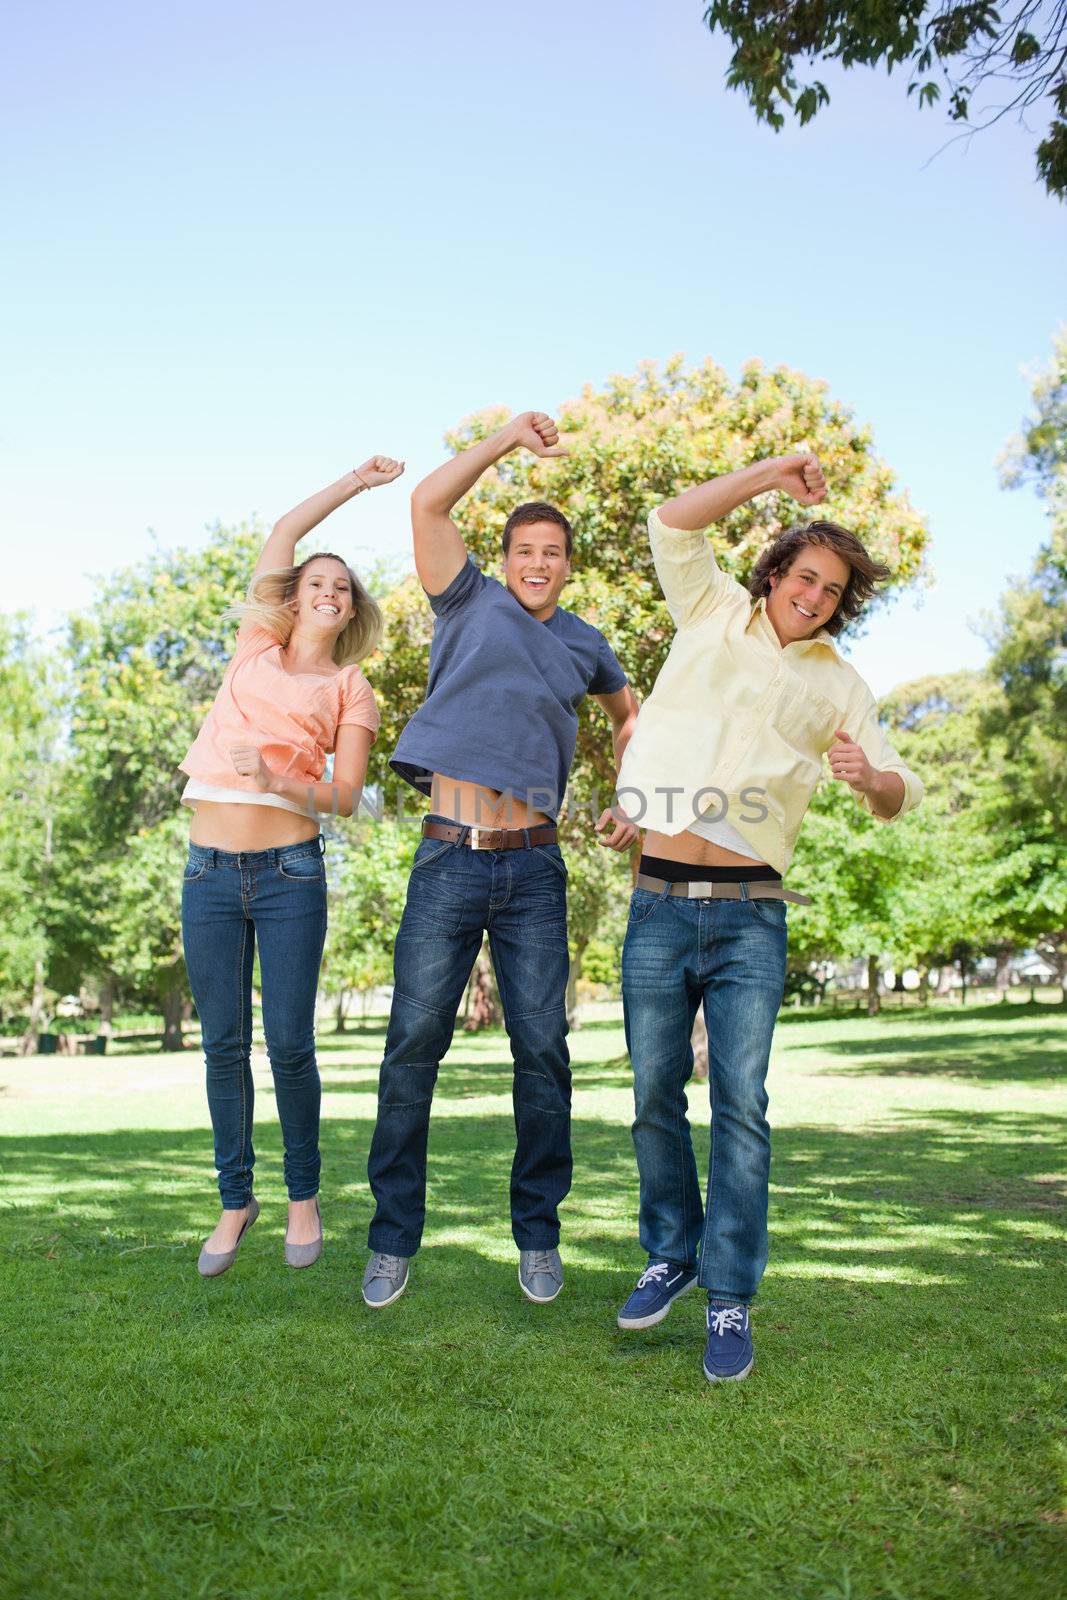 Three students jumping while raising an arm in a park